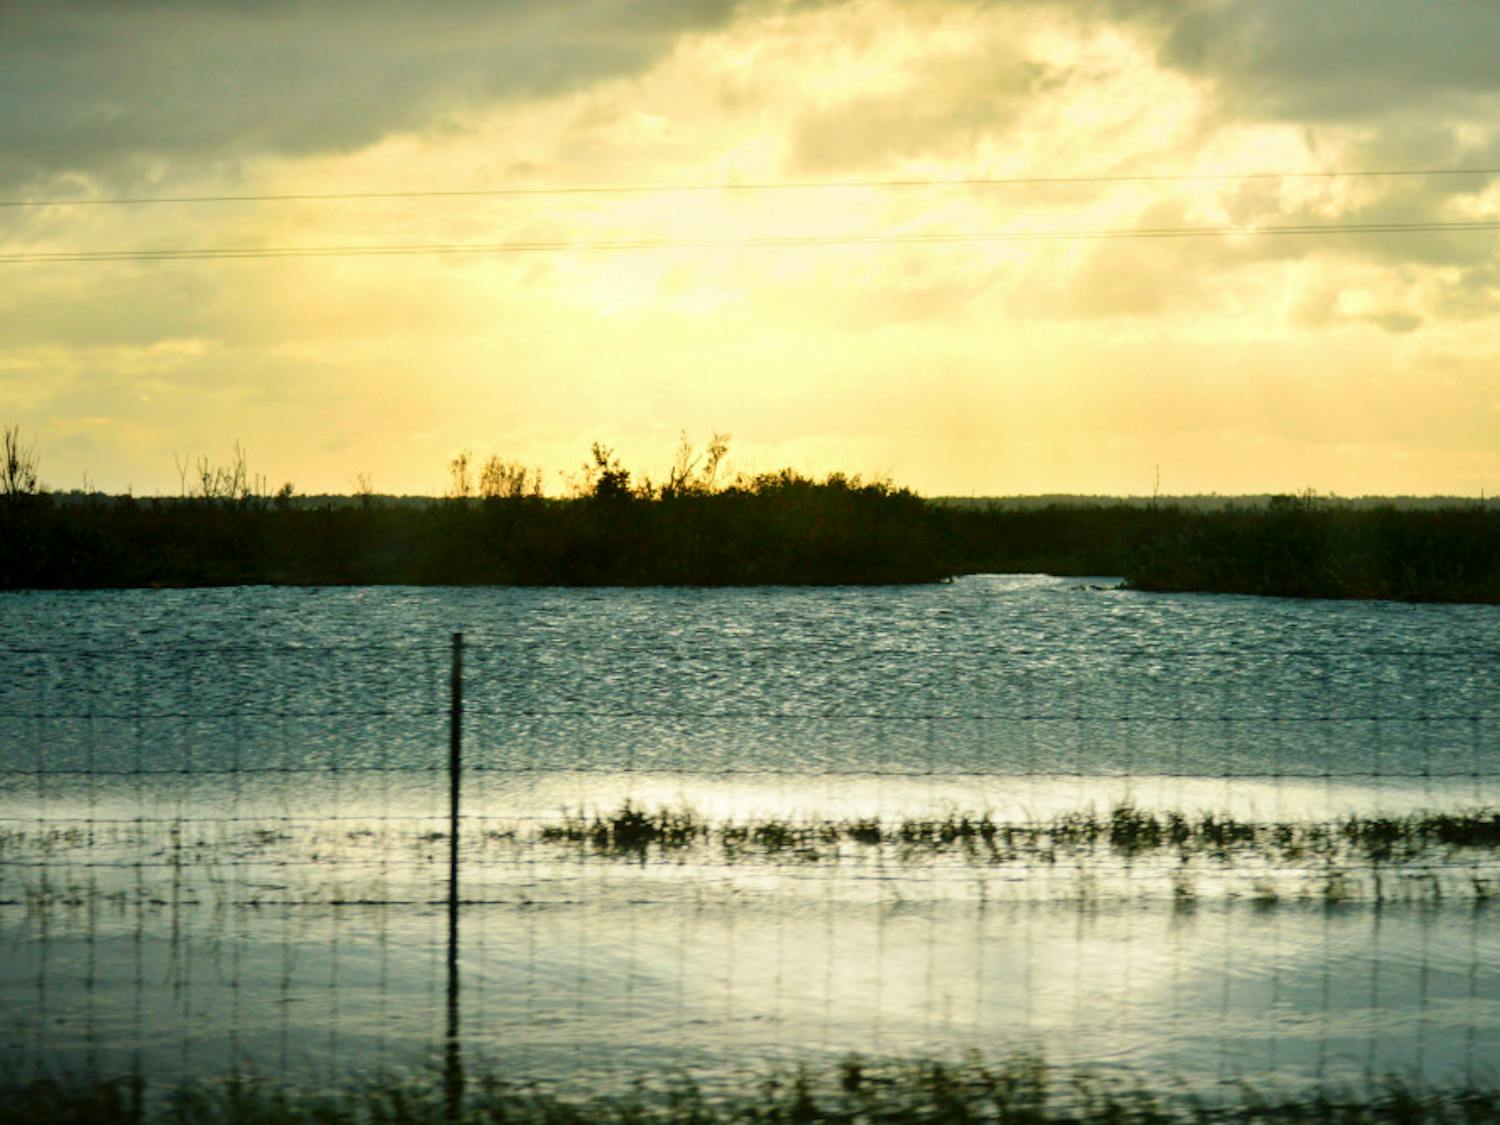 Heavy rainfall post-Hurricane Irma has yielded water levels so high that the once-open fields of Paynes Prairie Preserve State Park now more closely resemble lakes. The severe flooding has caused the closure of several trailheads as well as both northbound and southbound lanes of U.S. Route 441 near the state park.